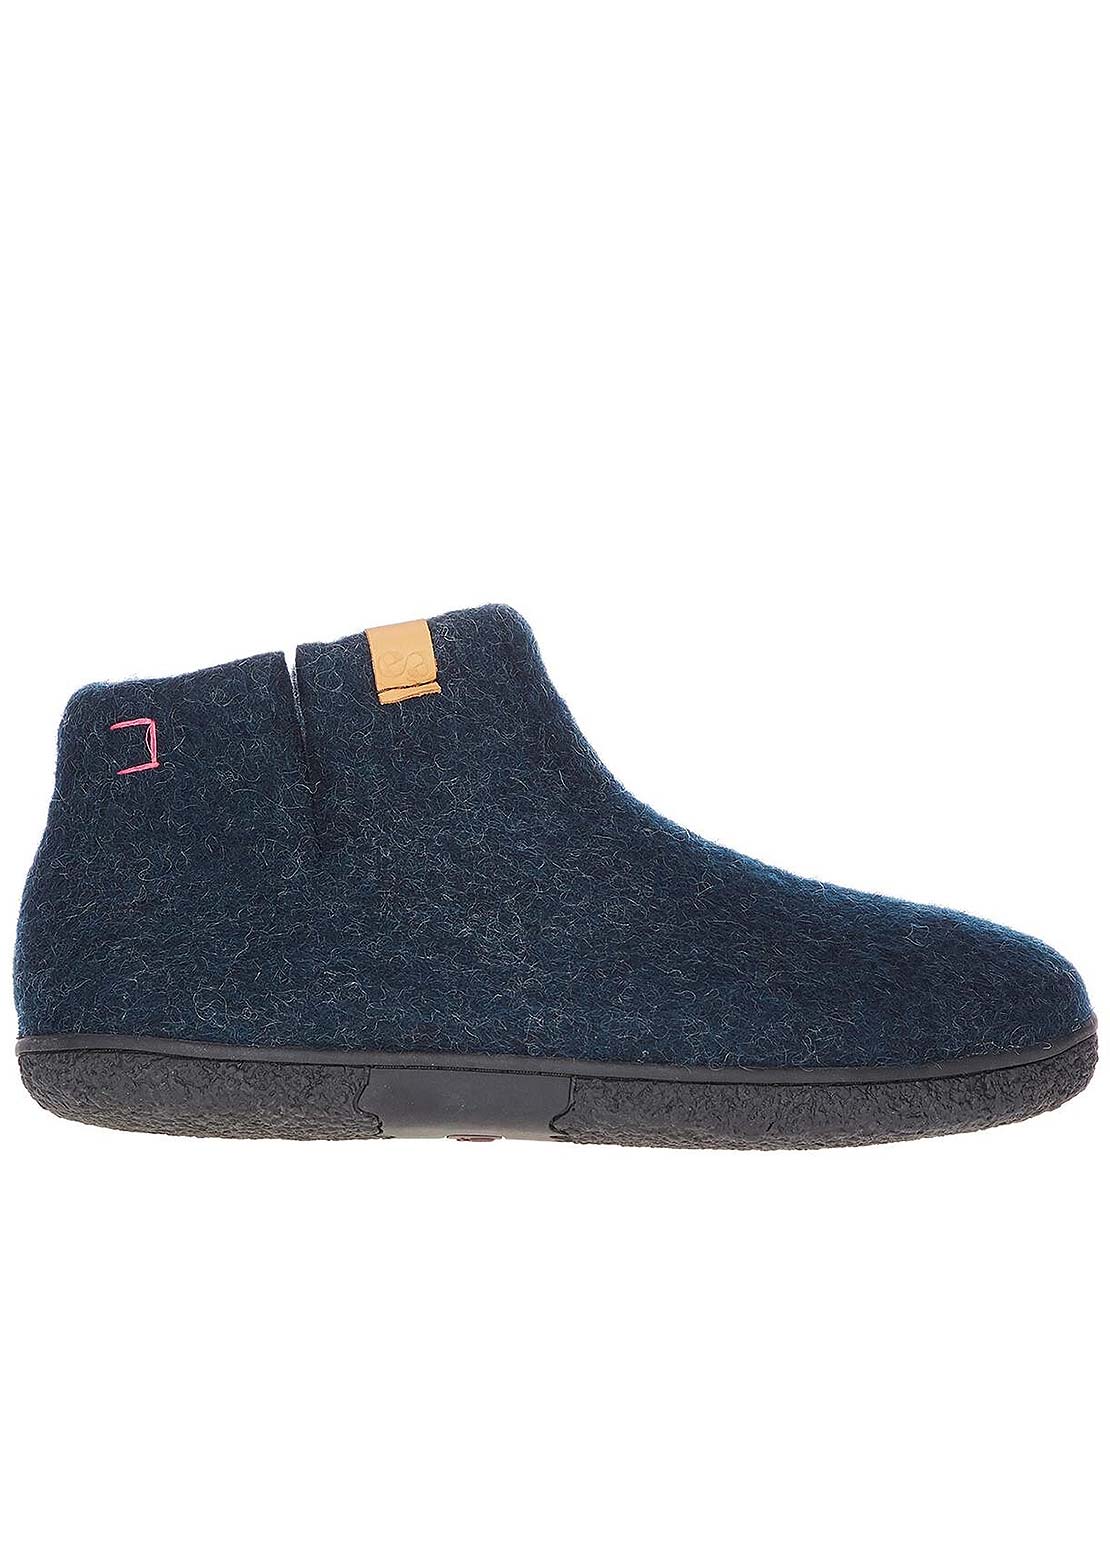 Wool by Green Unisex Nepal Rubber Sole Boots Marine BLue